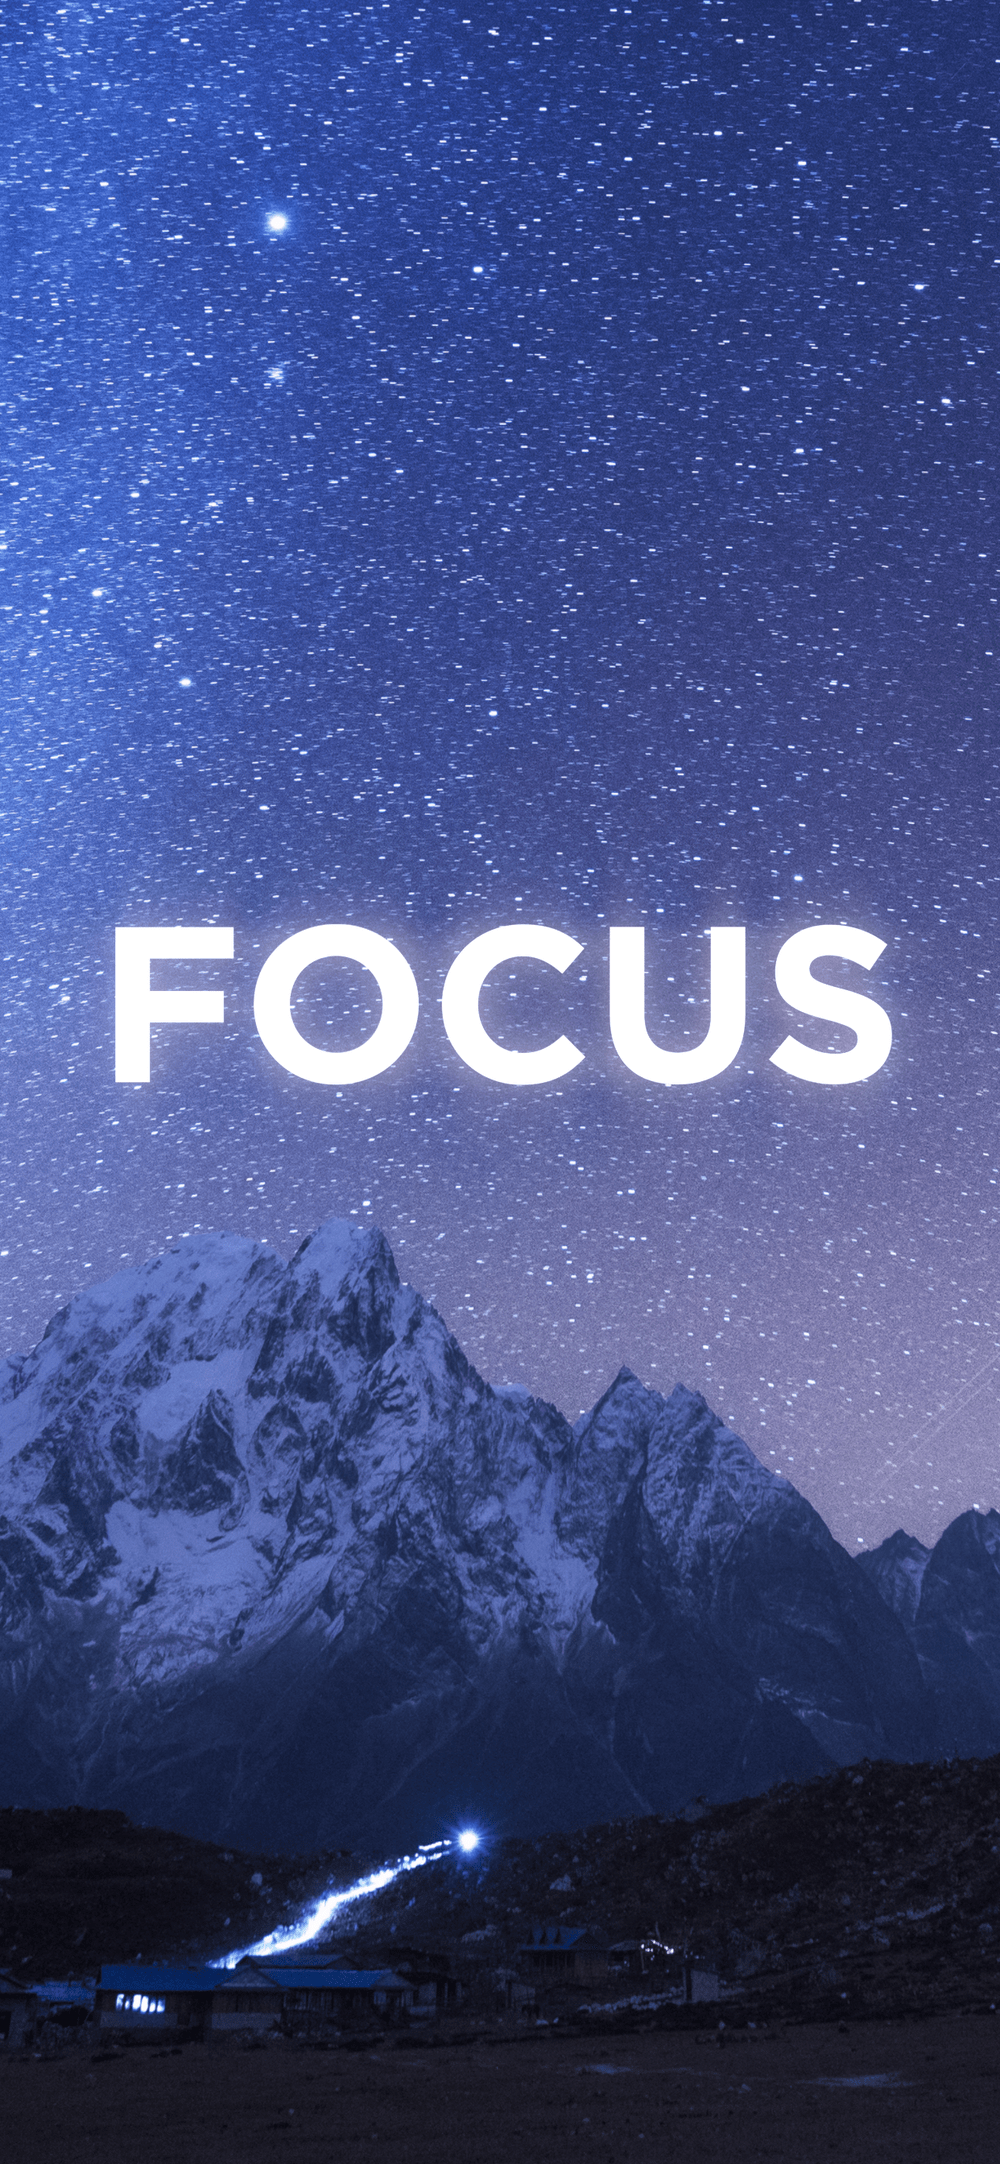 Focus download the new